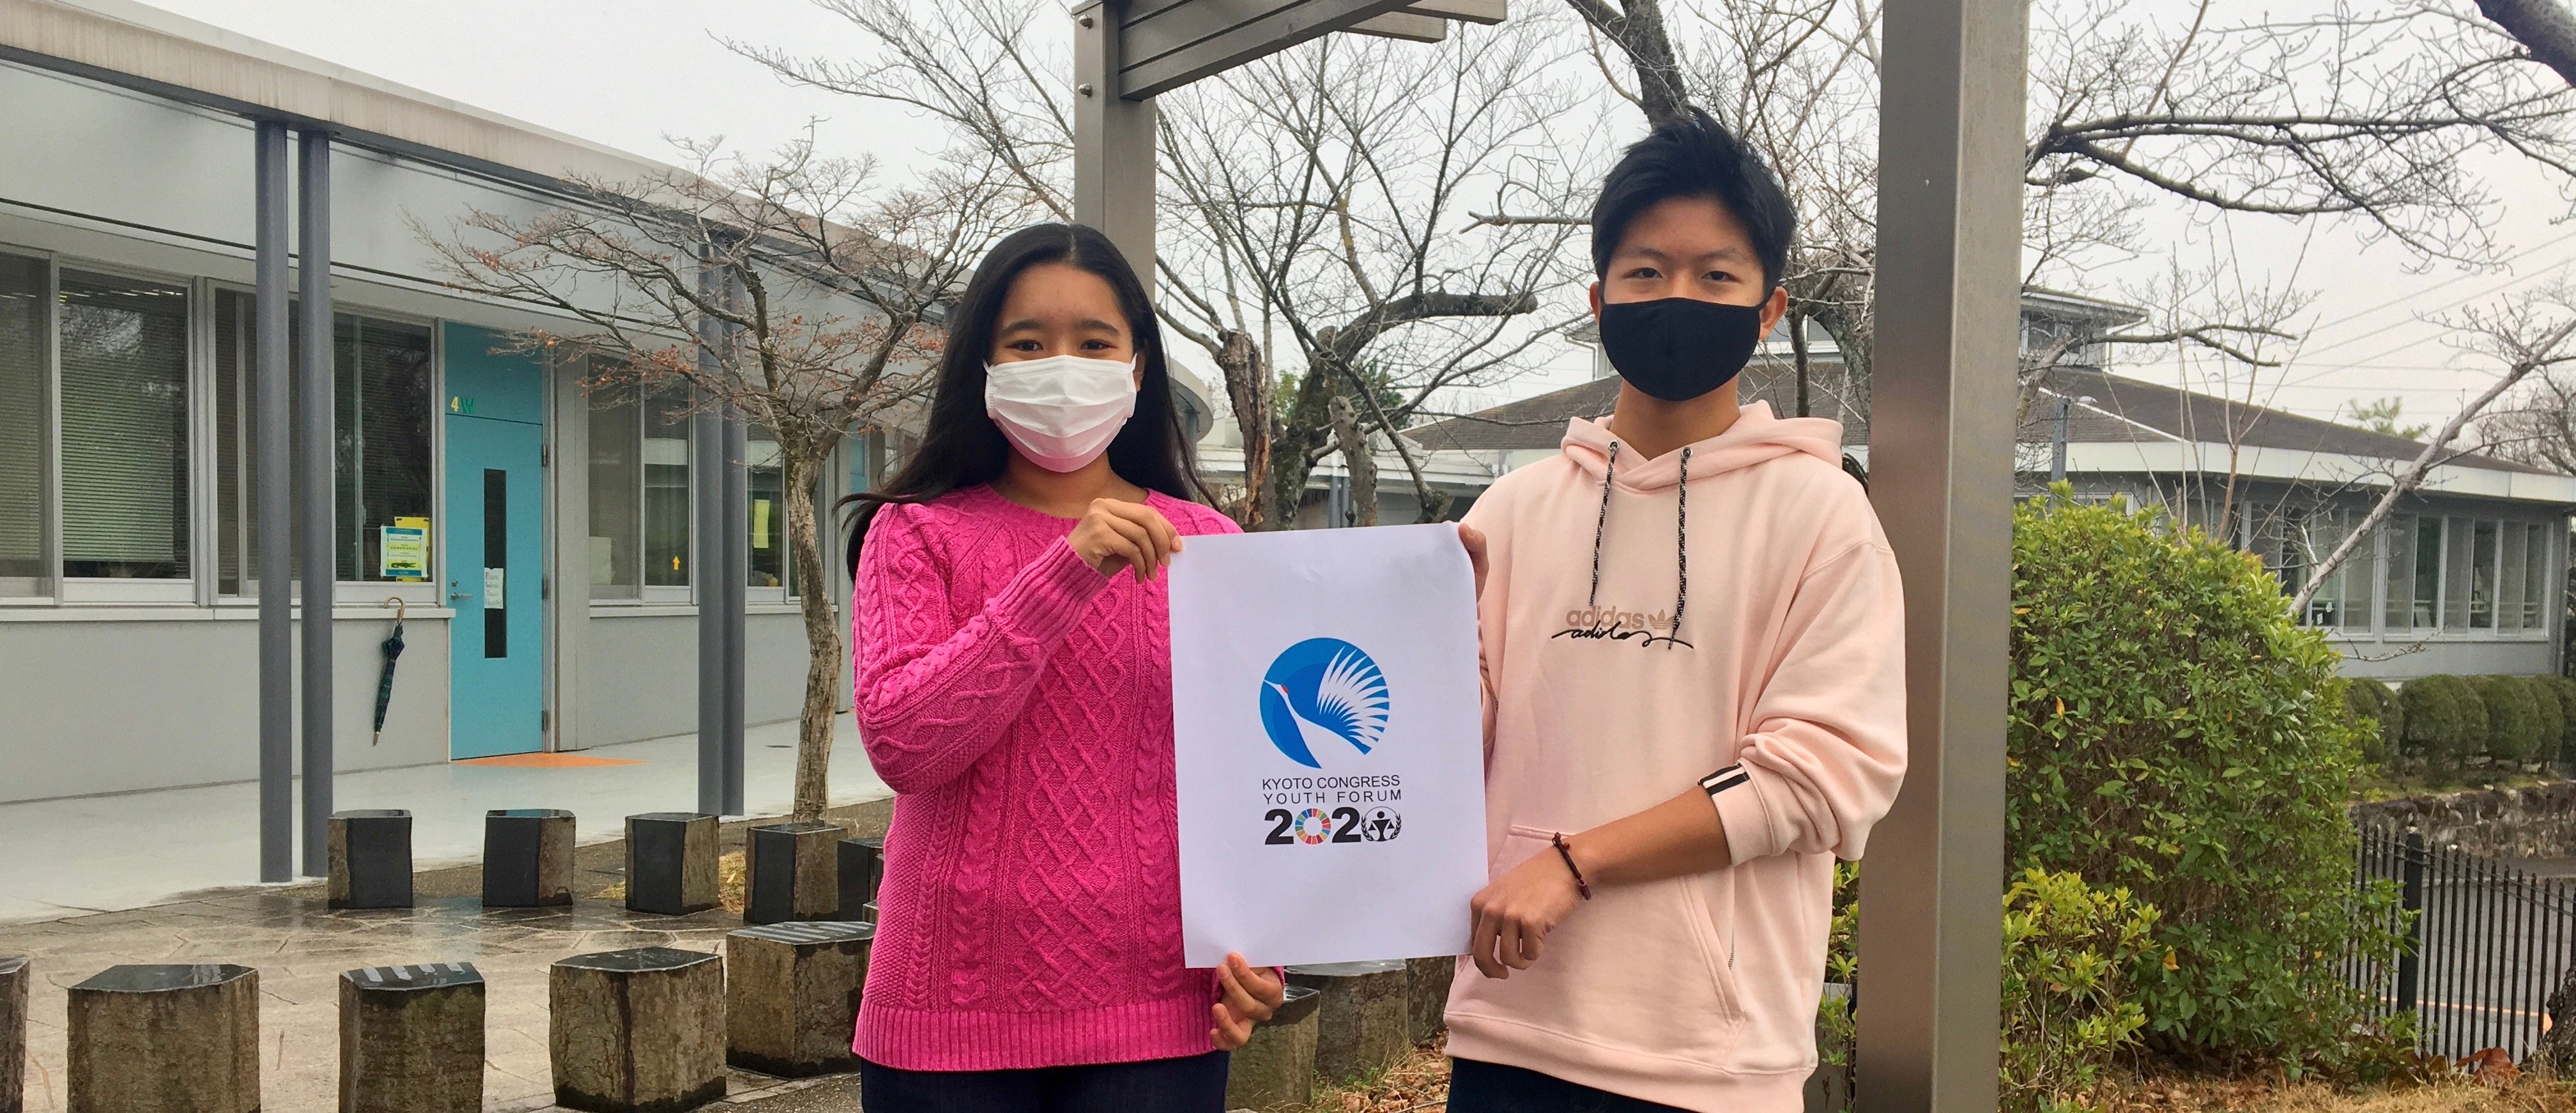 A boy and a girl holding a poster of Kyogo Congress Youth Forum